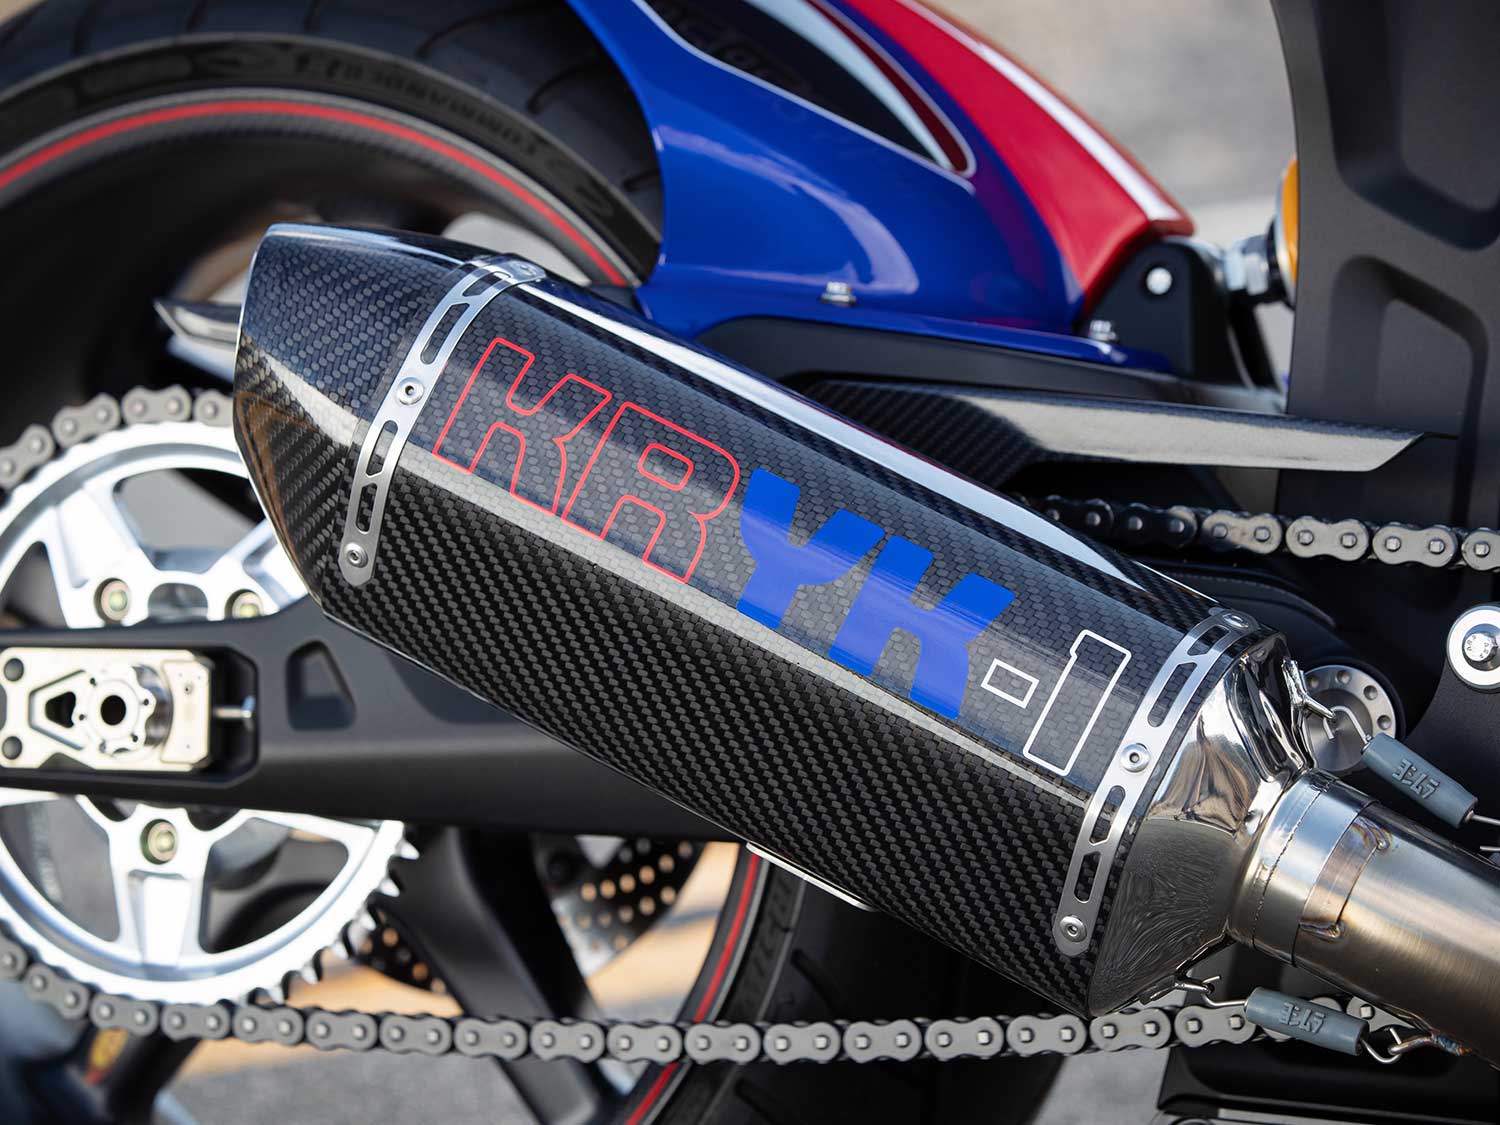 Arch worked with Yoshimura to develop the carbon-fiber muffler. KRYK? That stands for Yves Klein, who patented Yves Klein International Blue, the color this bike is meant to recreate.